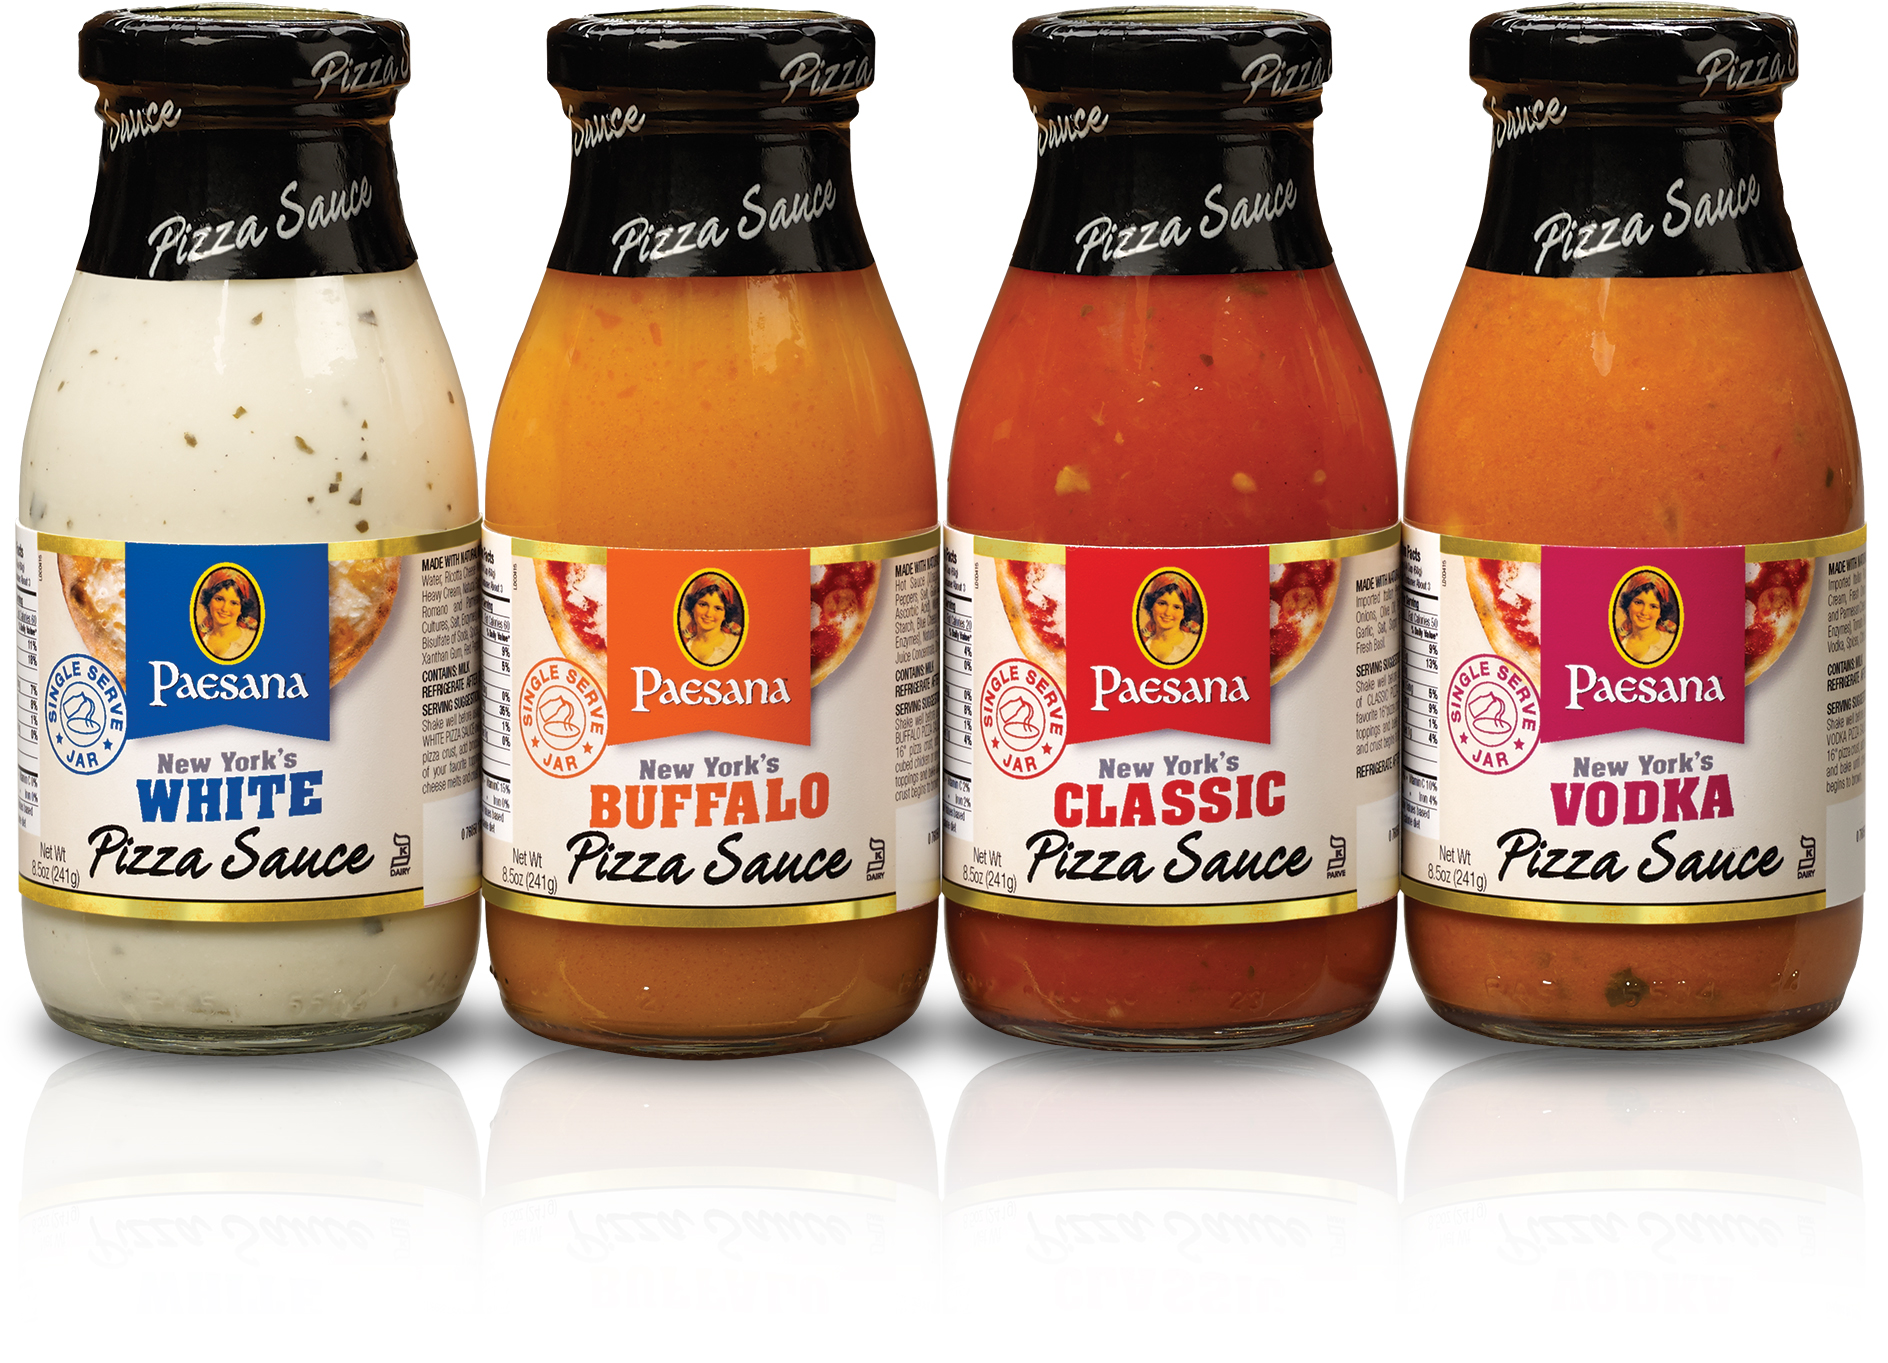 Paesana Pizza Sauce bottles with new labels